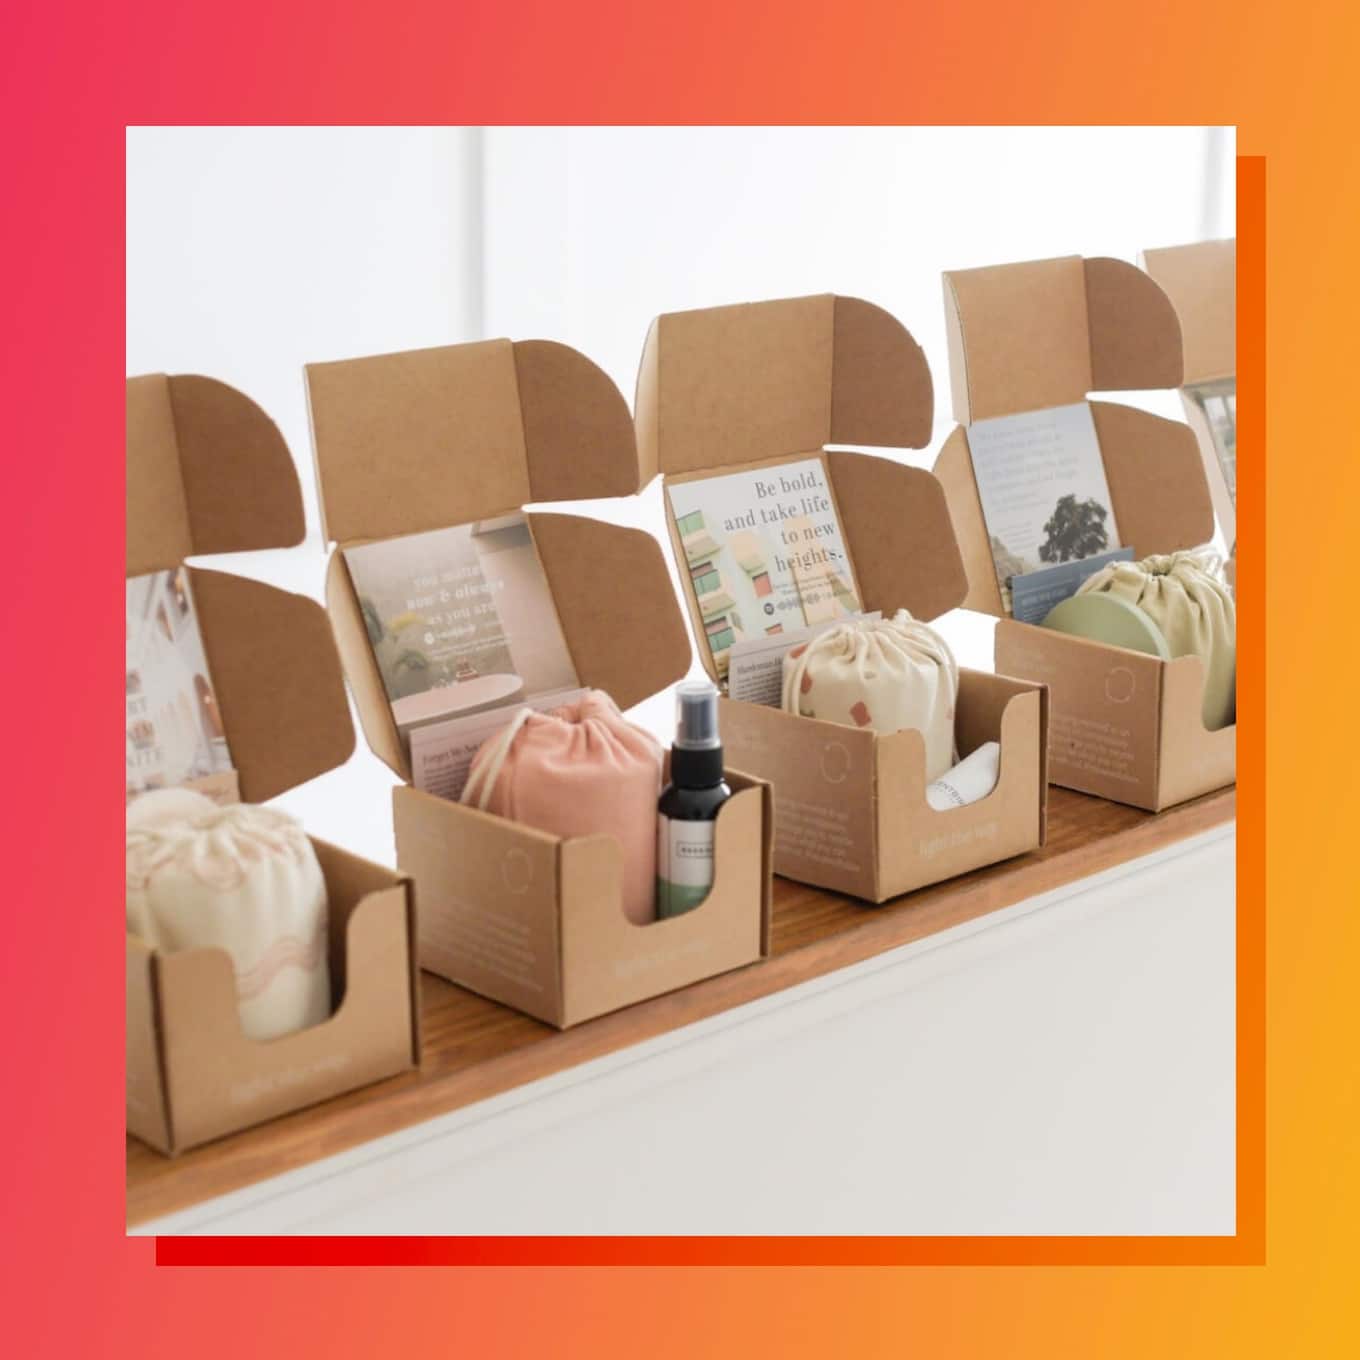 Several cardboard boxes with wrapped candles and other products